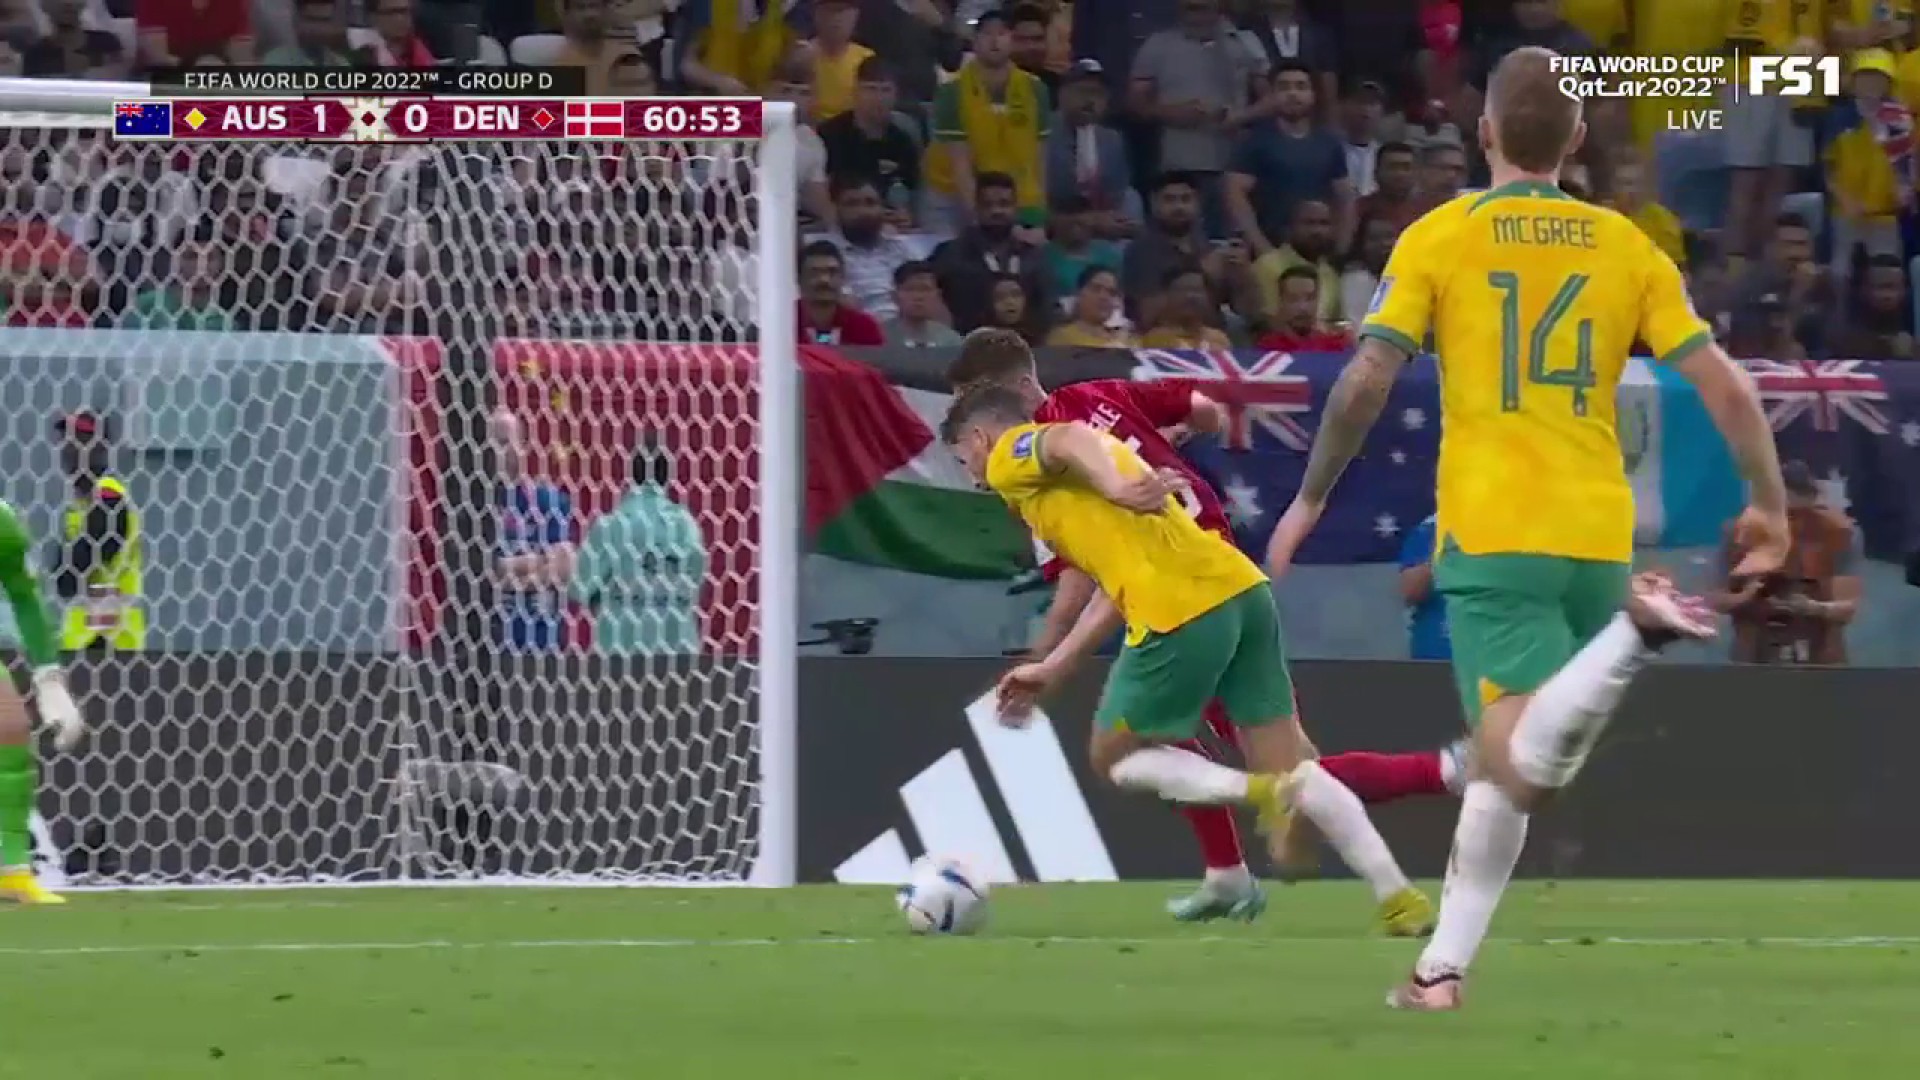 This goal by Mathew Leckie was CLINICAL 🇦🇺🔥”